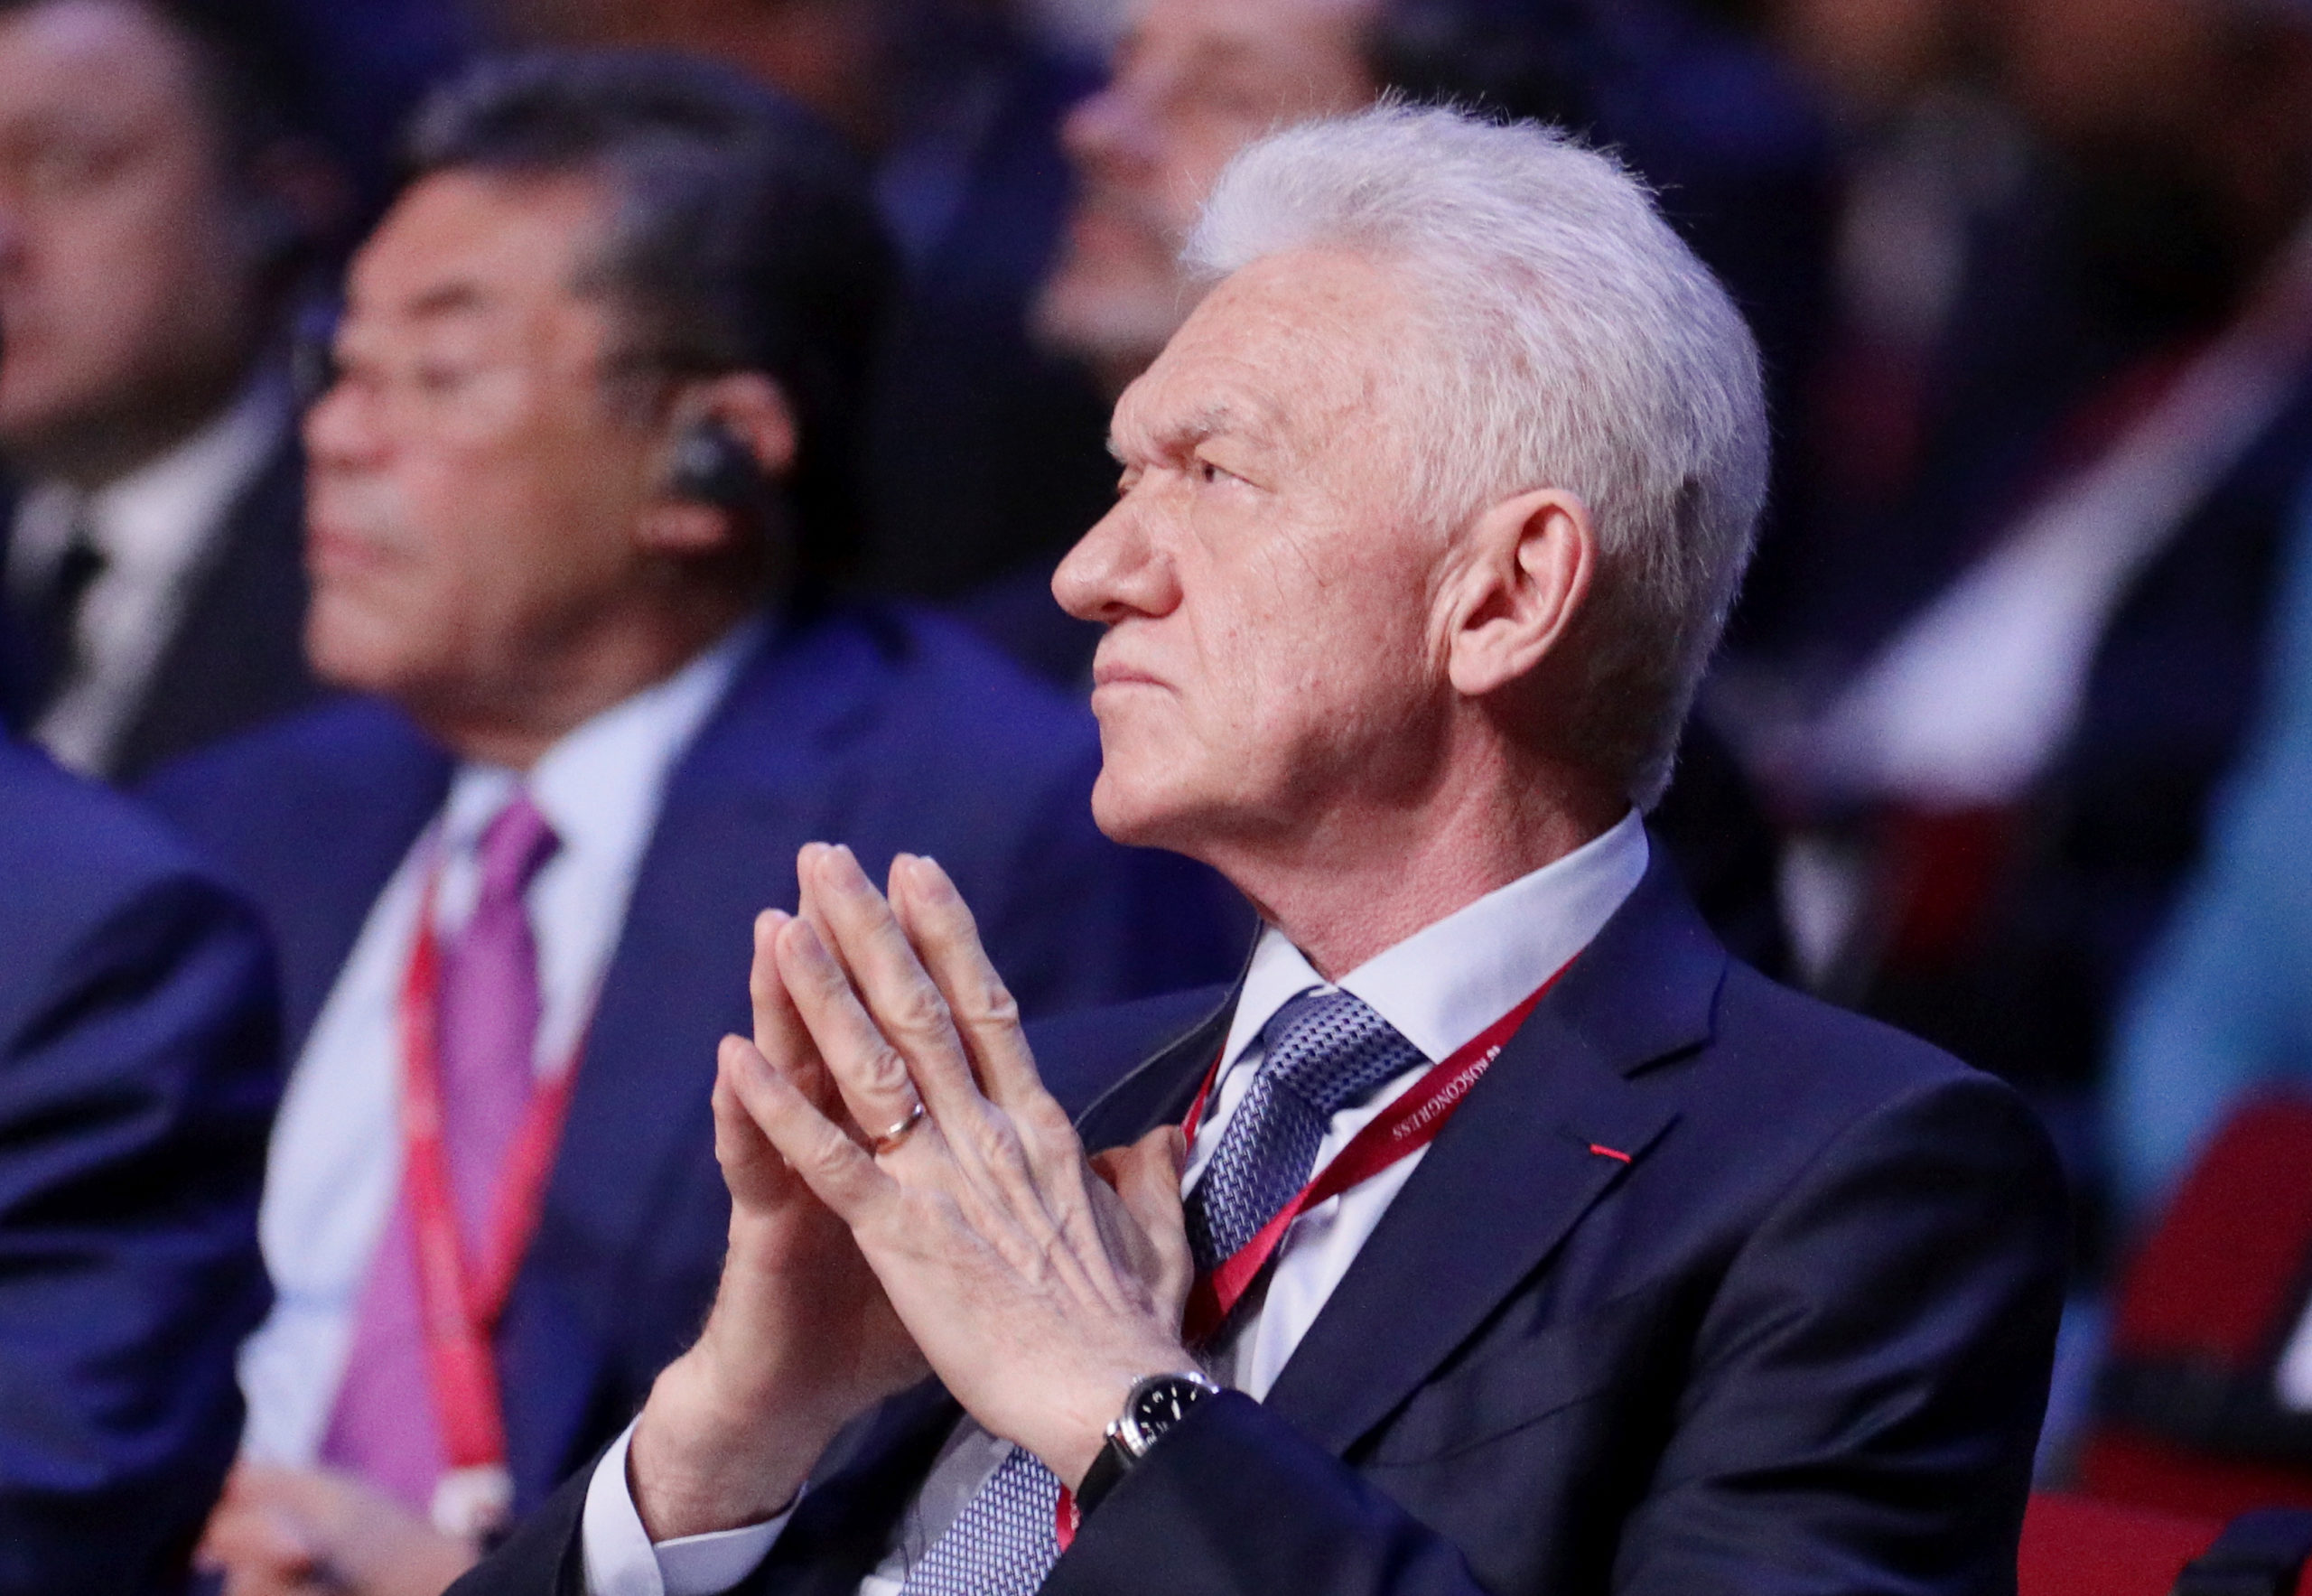 Gennady Timchenko, a Finnish Russian oligarch and CEO of the Volga Group, a Russian investment company focused on energy, transportation and construction. 